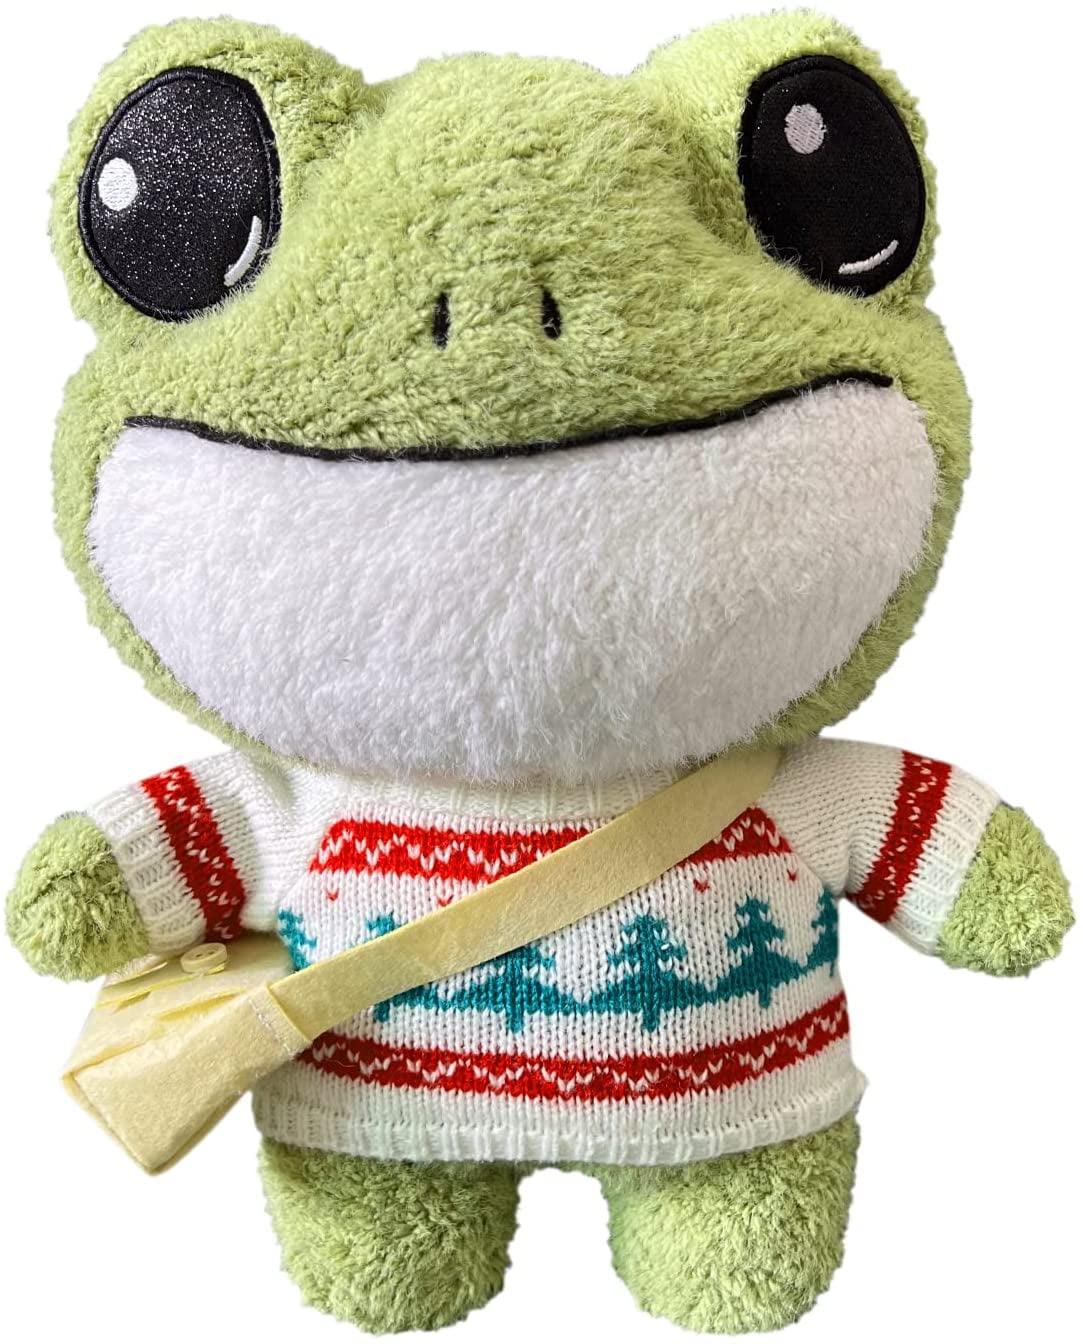 Frog Stuffed Animal Frog Plush with accessories Plush Toy, Soft and Cute,  with Clothes and Bag, Standing Frog Gift for Boys and Girls 